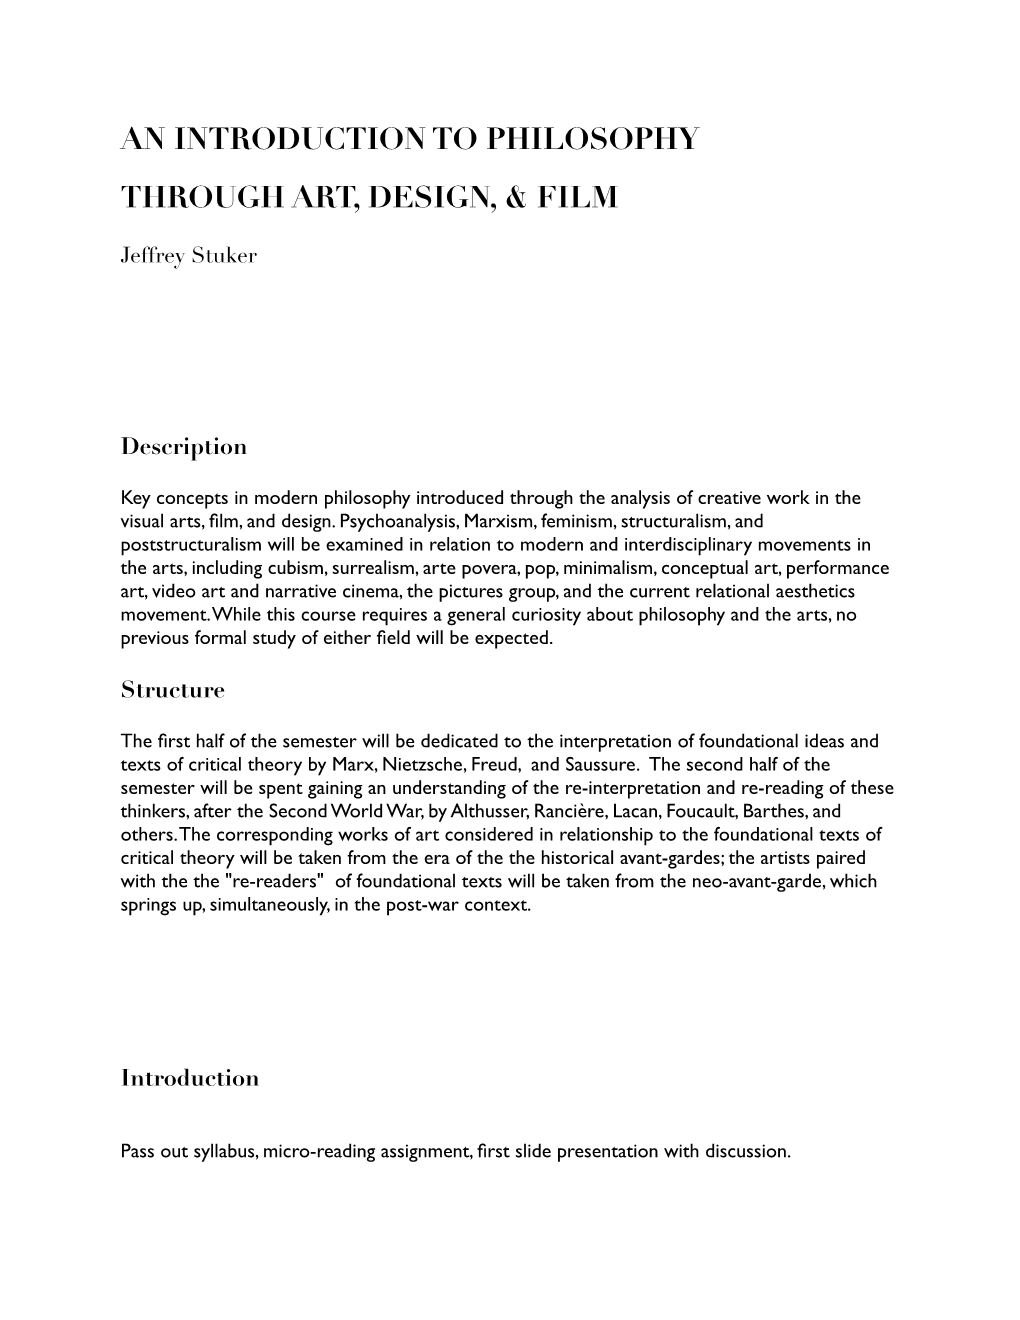 Introduction to Philosophy Through Art, Design, and Film